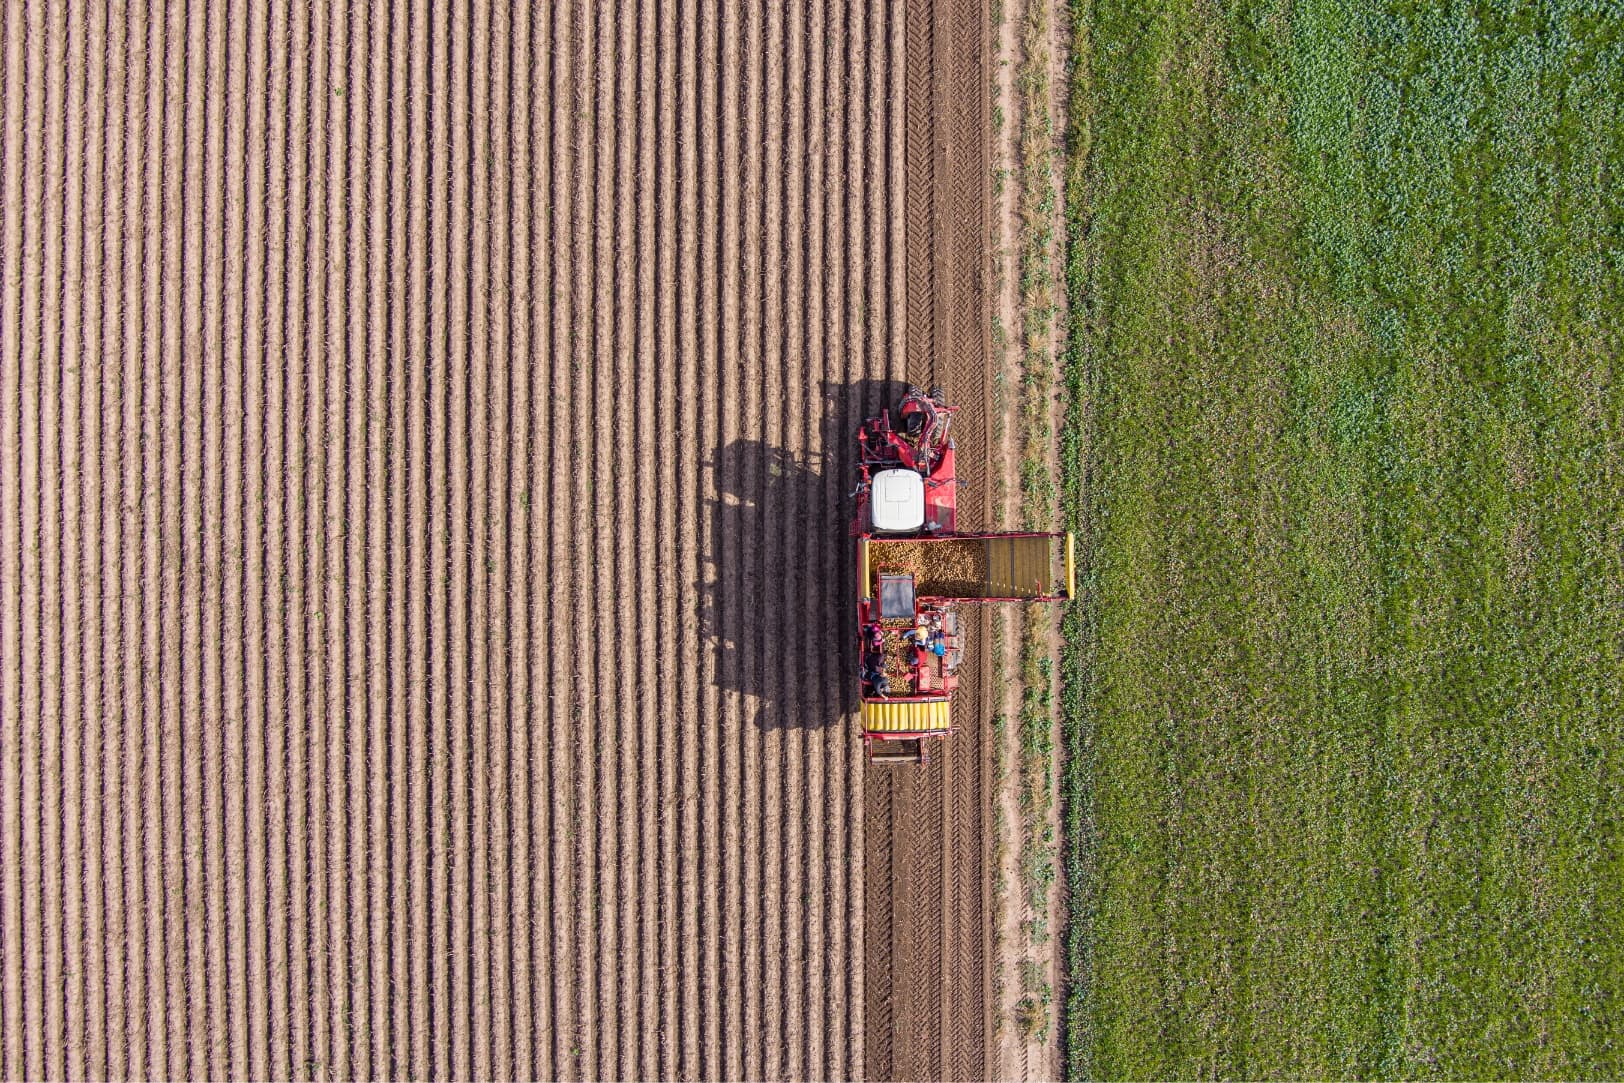 pic-agricultural-truck-harvesting-potatoes-1624x1083-1